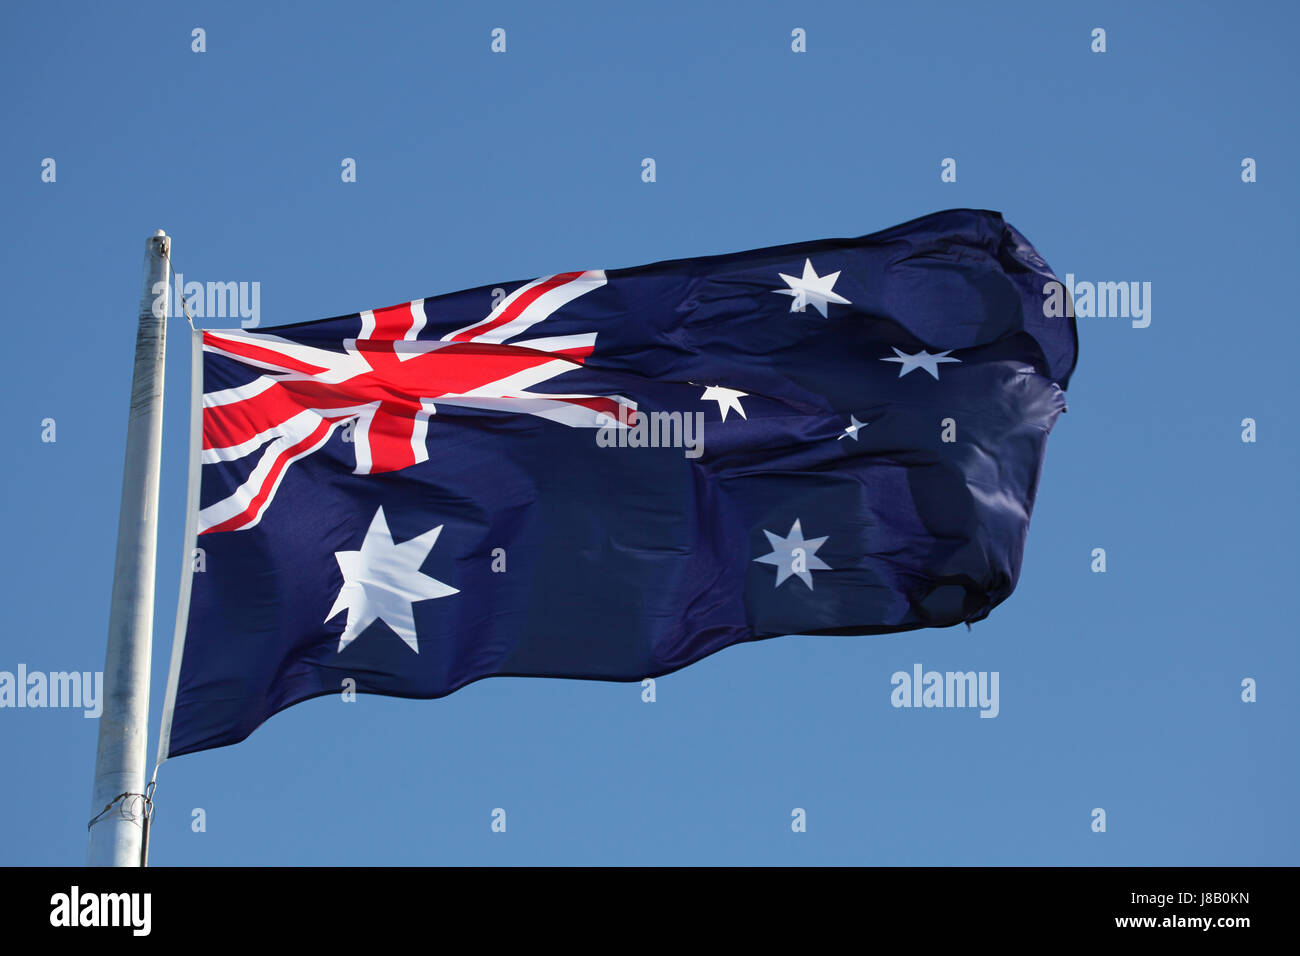 commonwealth, jack, union, clicking, journal box, wind, star, rot, wind, Stock Photo